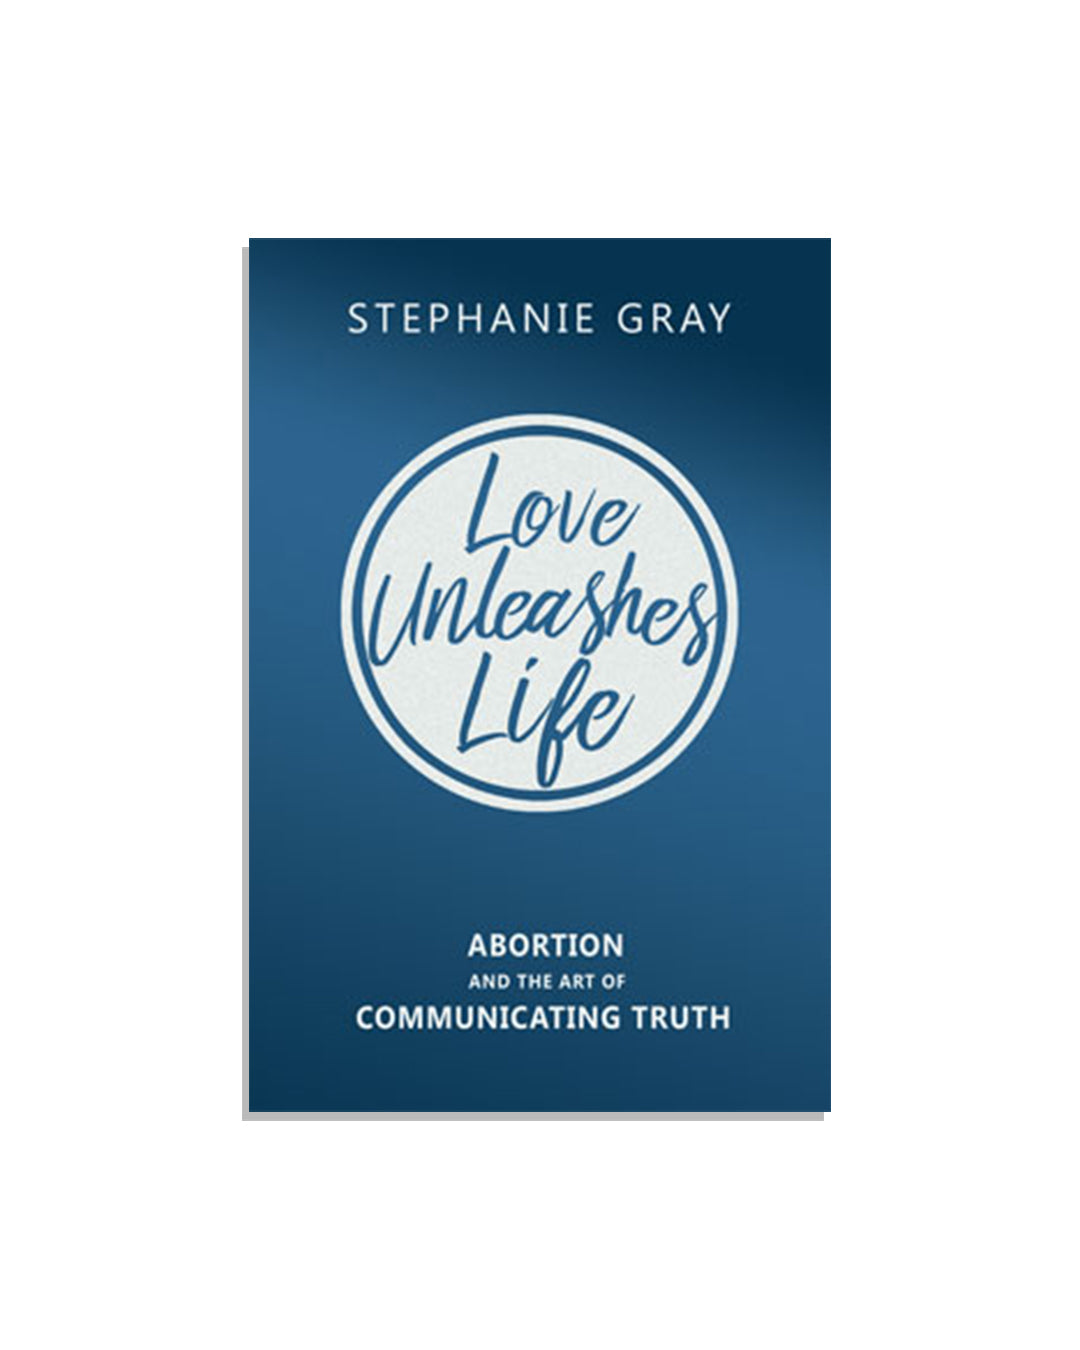 Love Unleashes Life: Abortion and the Art of Communicating Truth